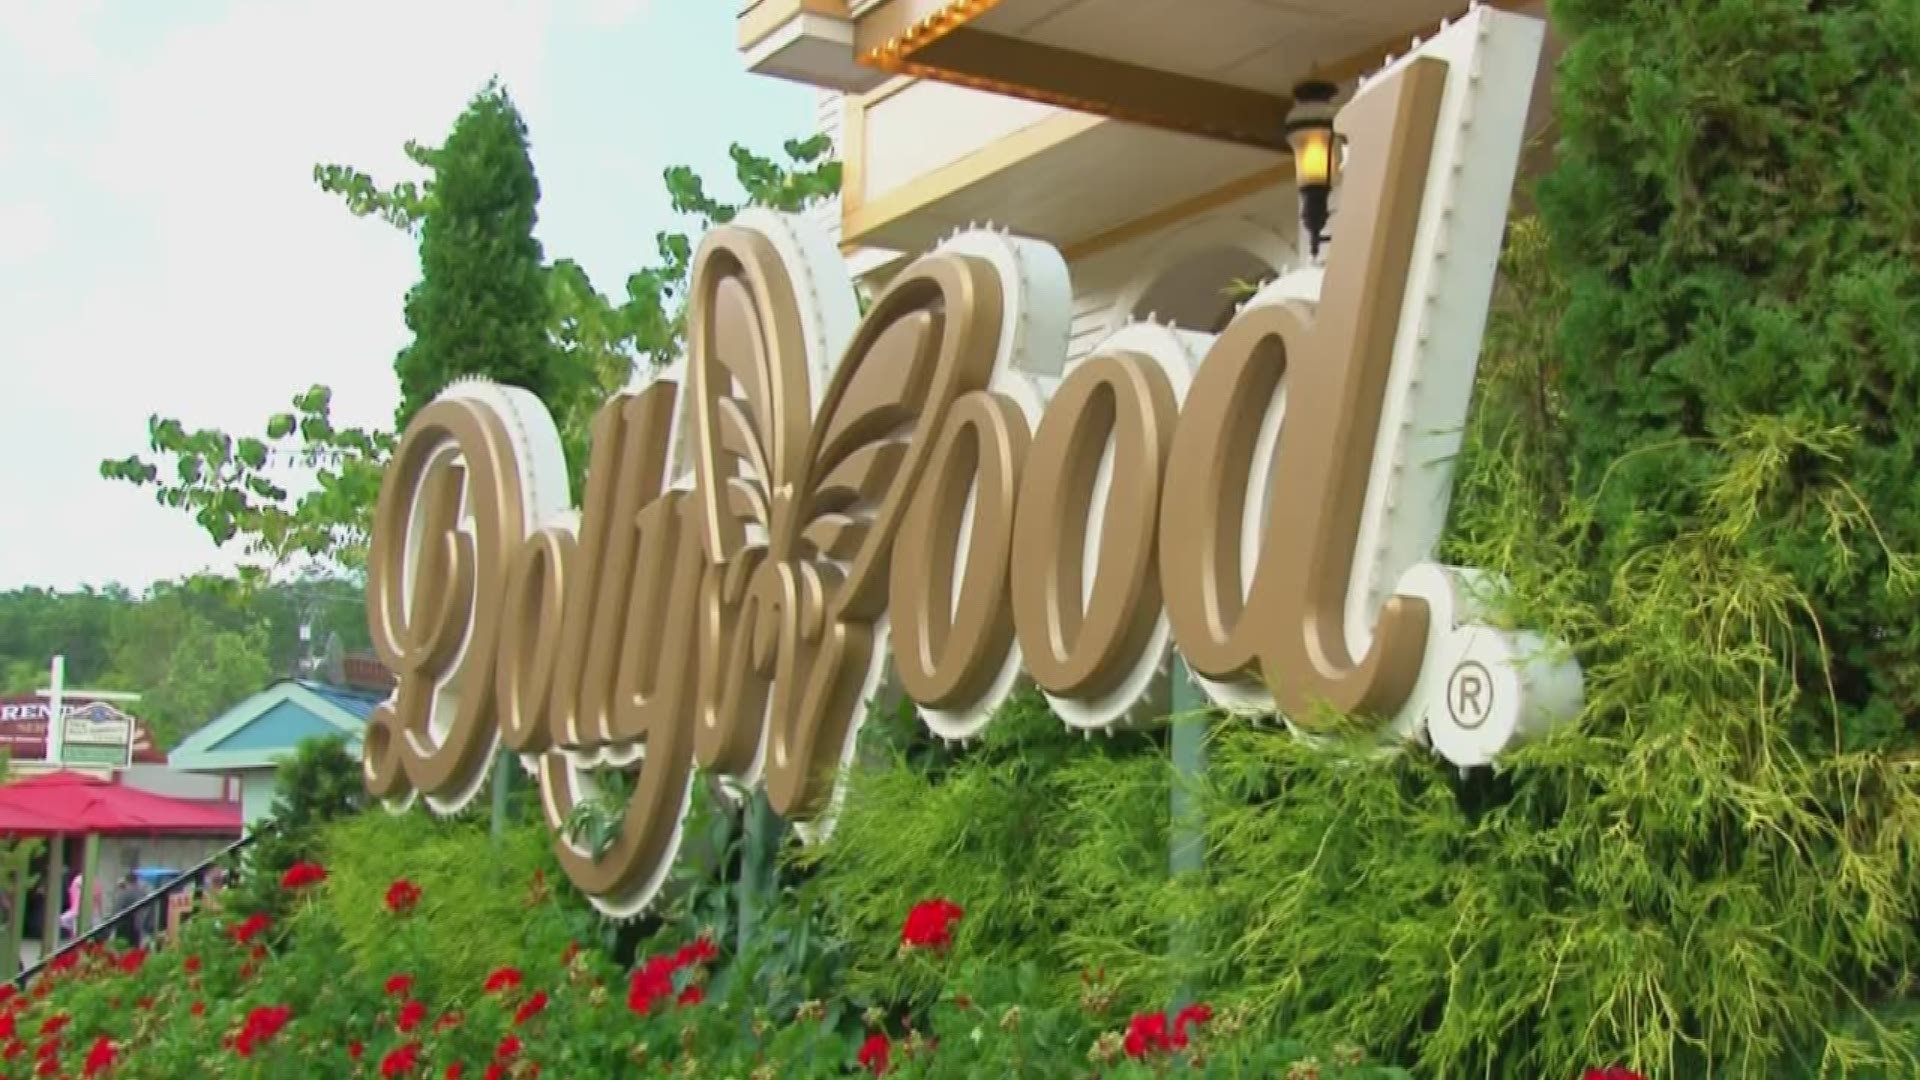 Dollywood hiring events coming up in East Tennessee